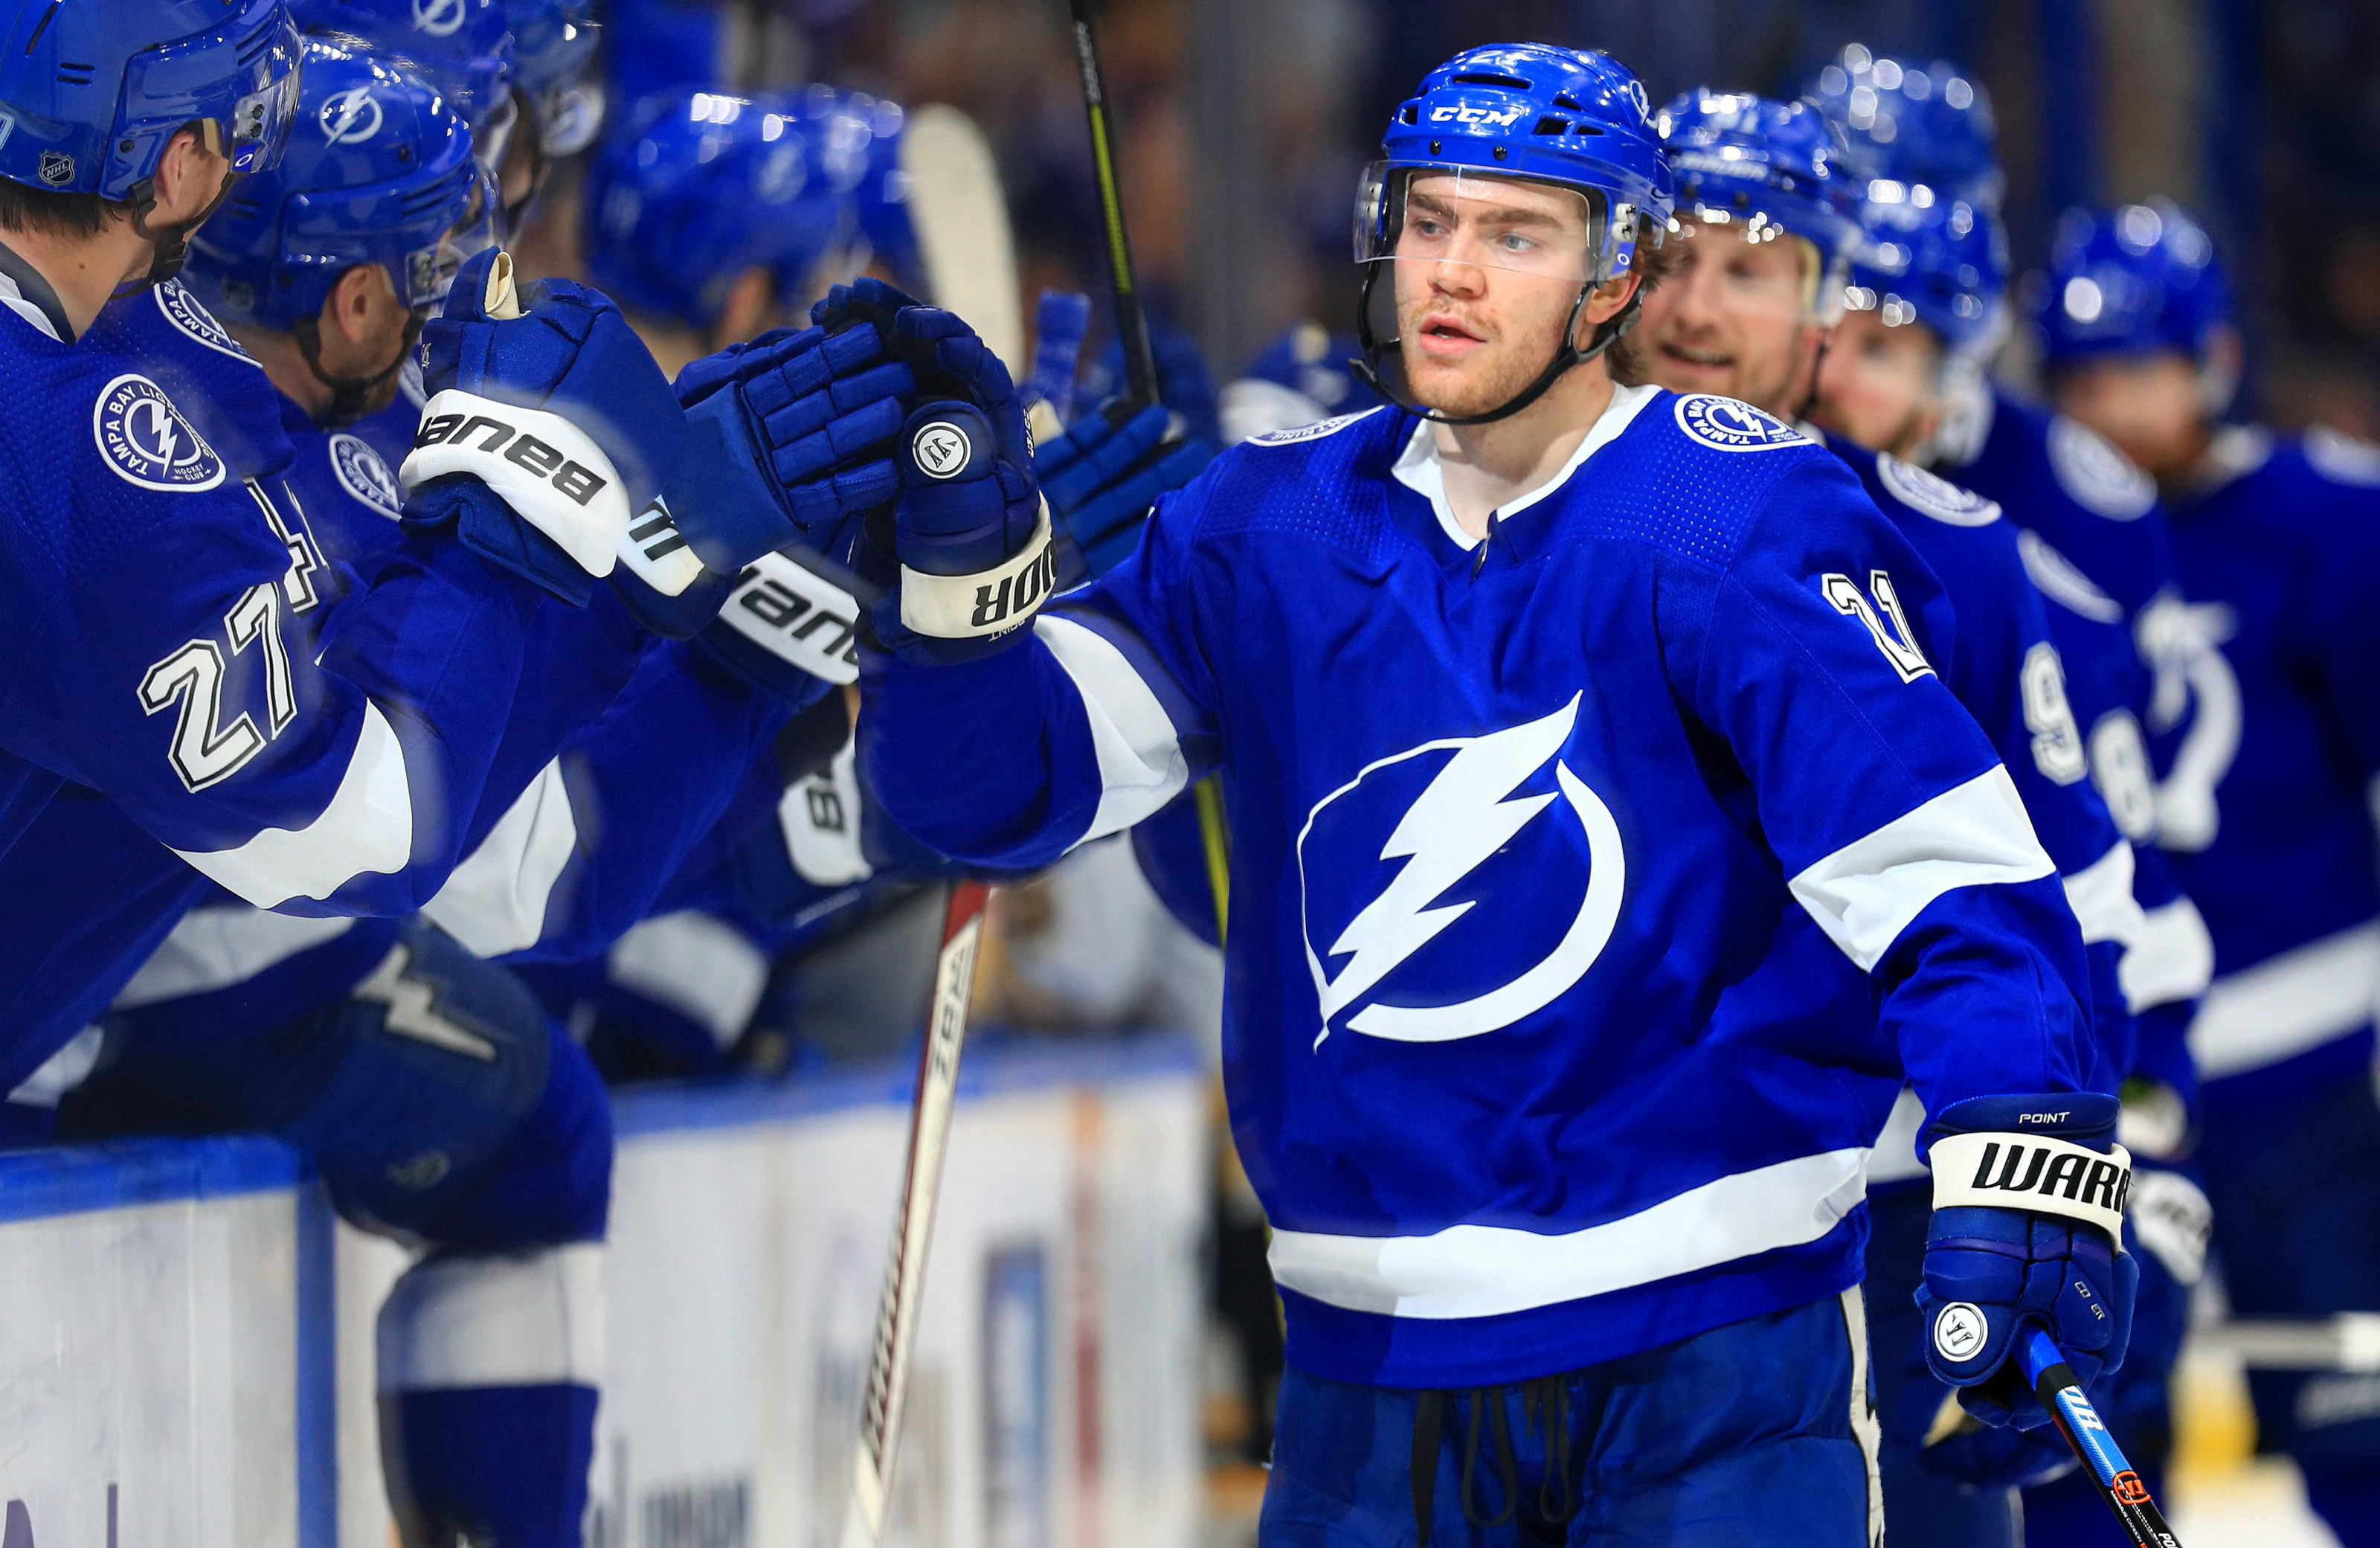 Tampa bay lightning page on flashscore.com offers livescore, results, stand...